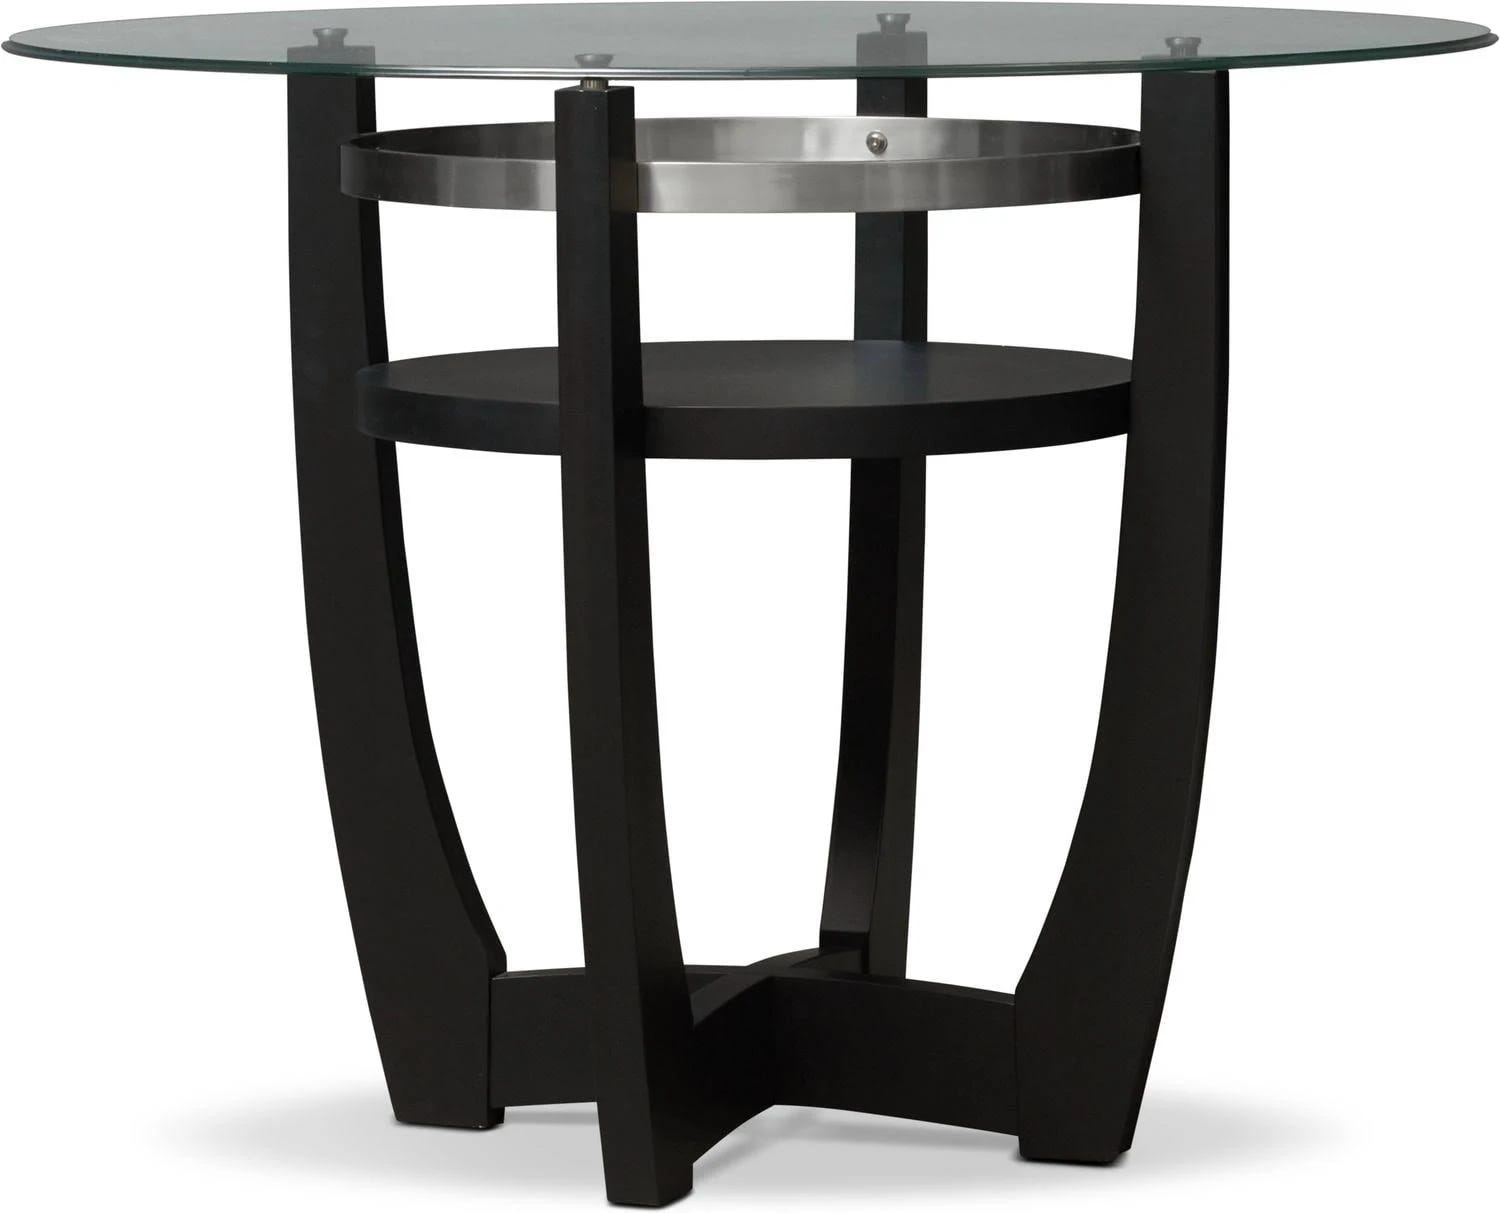 Lennox Counter-Height Kitchen Dining Table | Image